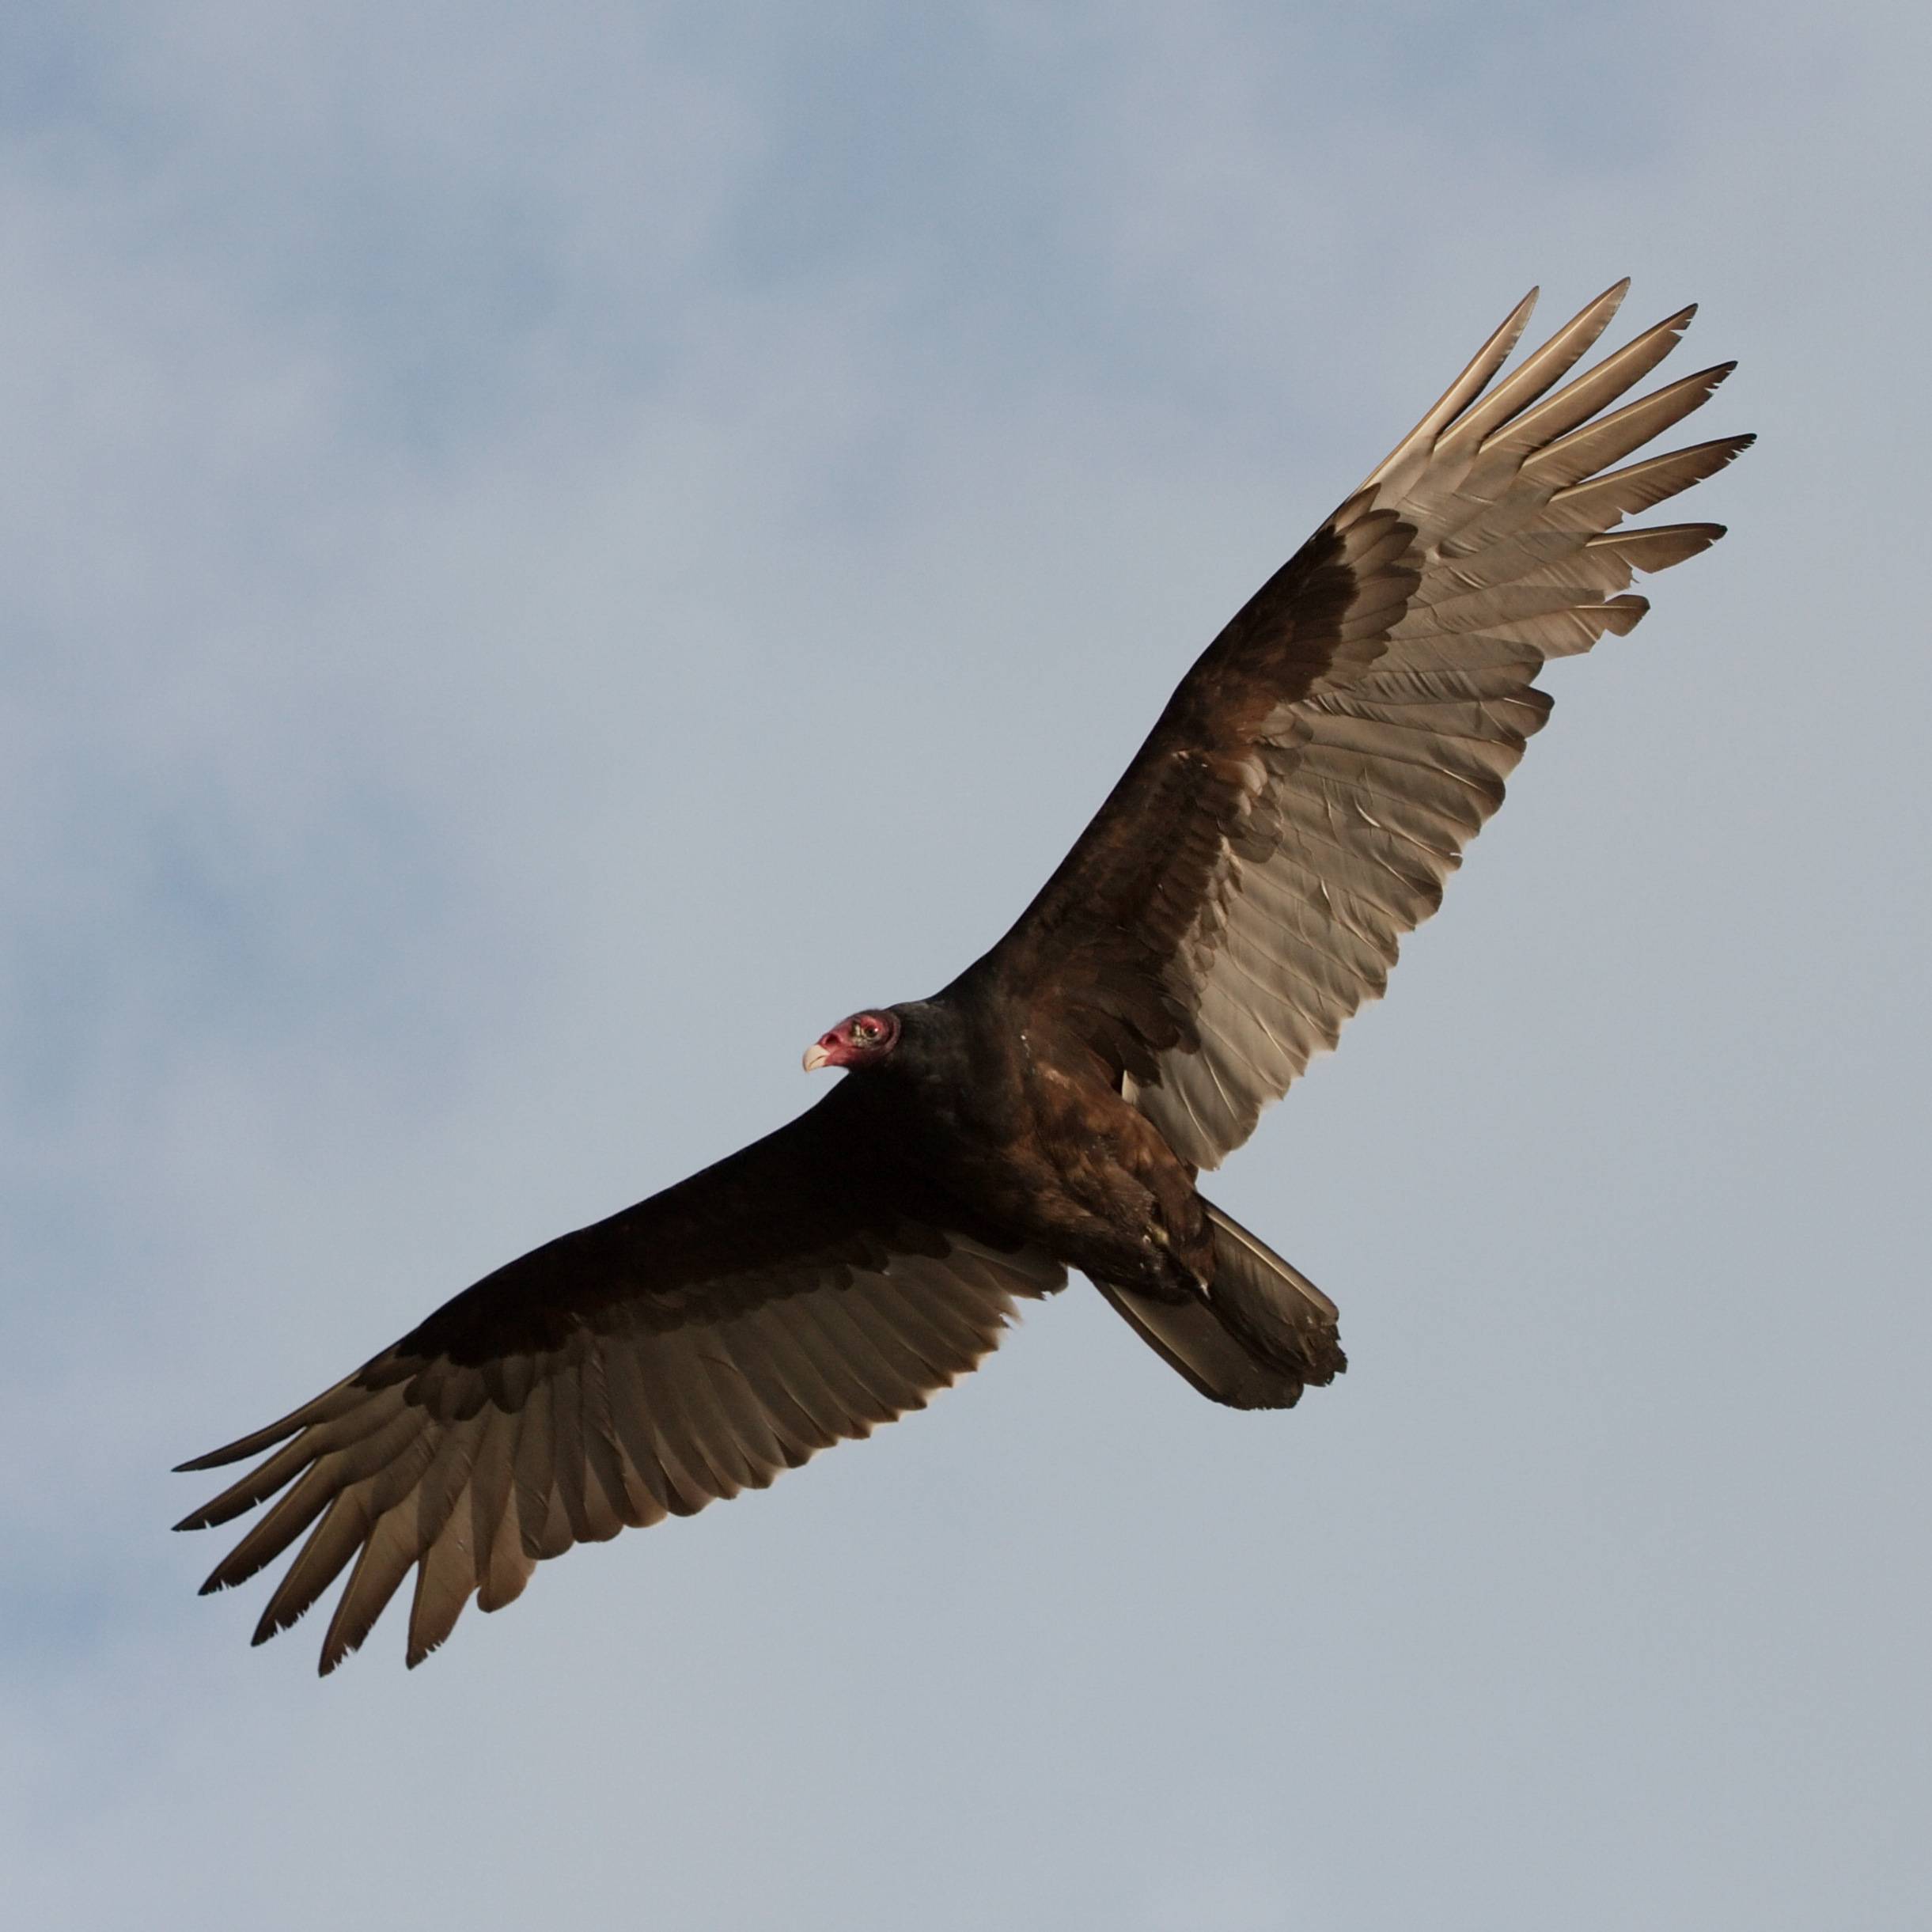 Masses Of Vultures In Cities Pose A Threat To Aircraft